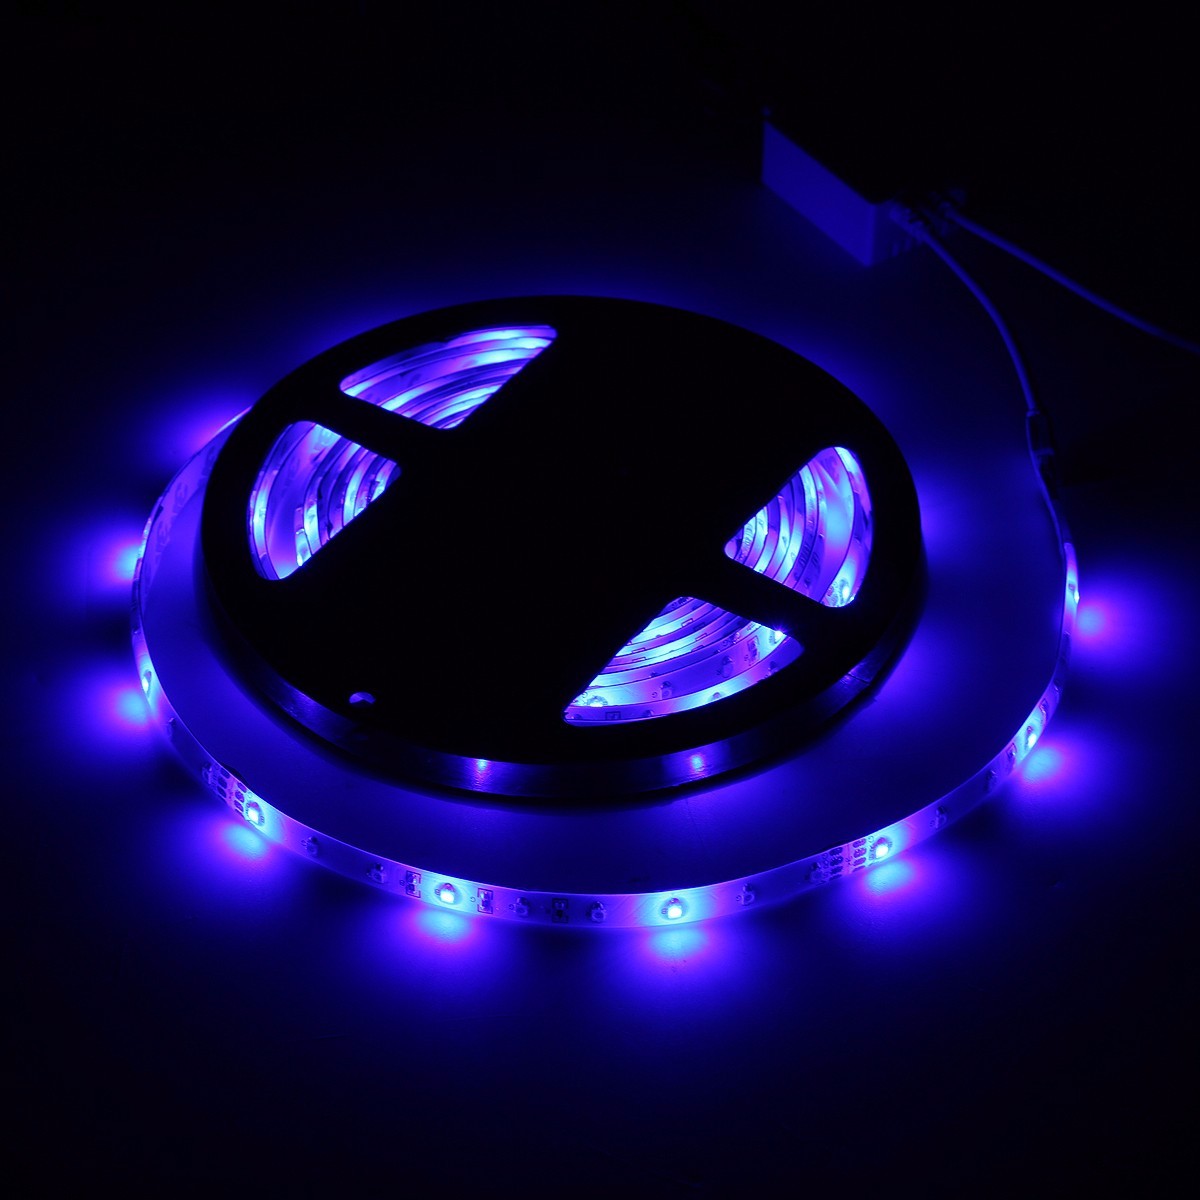 Find 5M 3528 SMD 300LED RGB Waterproof Flexible Strip Light 44 keys Remote Control EU Plug DC12V for Sale on Gipsybee.com with cryptocurrencies